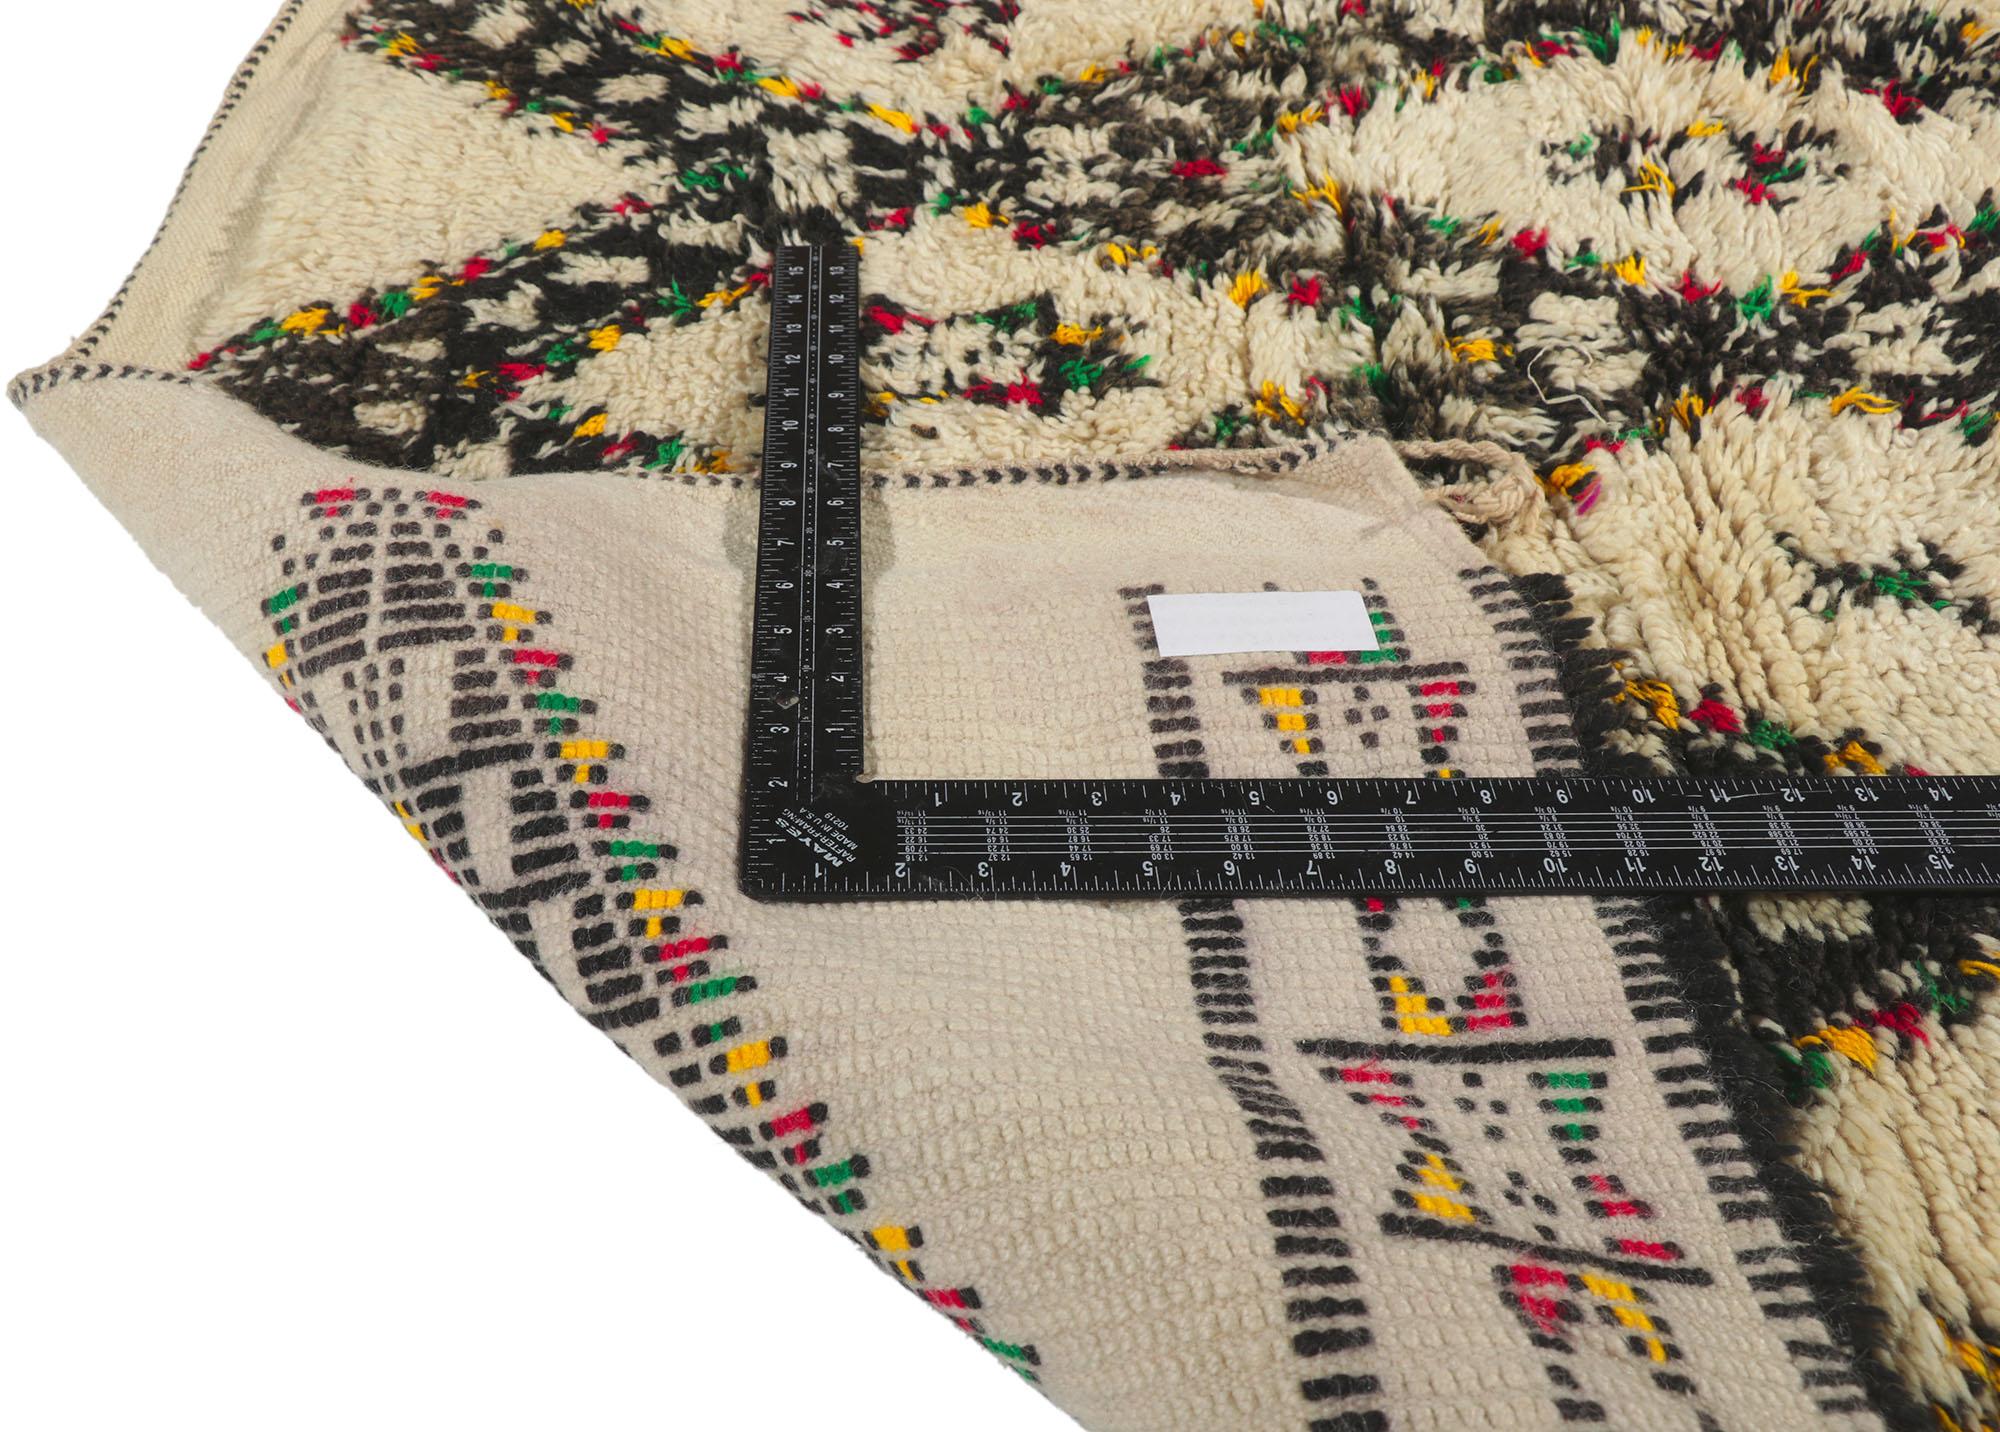 Vintage Moroccan Beni Ourain Rug, Midcentury Boho Meets Tribal Enchantment In Good Condition For Sale In Dallas, TX